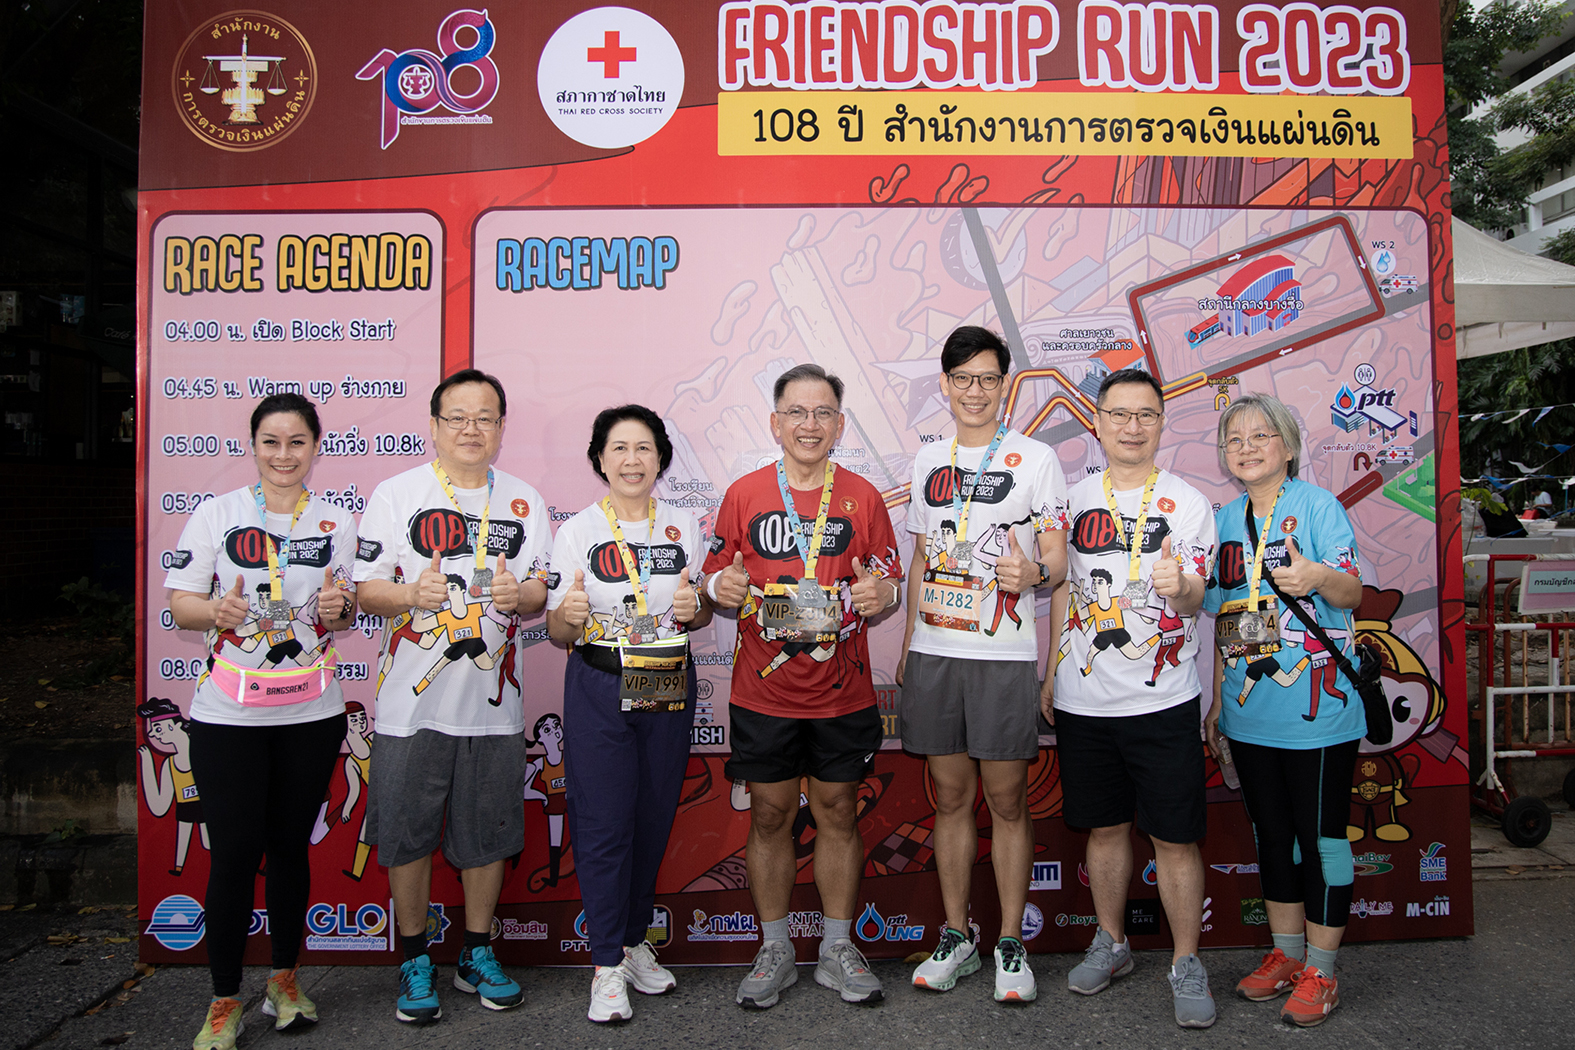 EXIM Thailand Participates in the 108th Anniversary Friendship Run 2023 Organized by the State Audit Office of the Kingdom of Thailand